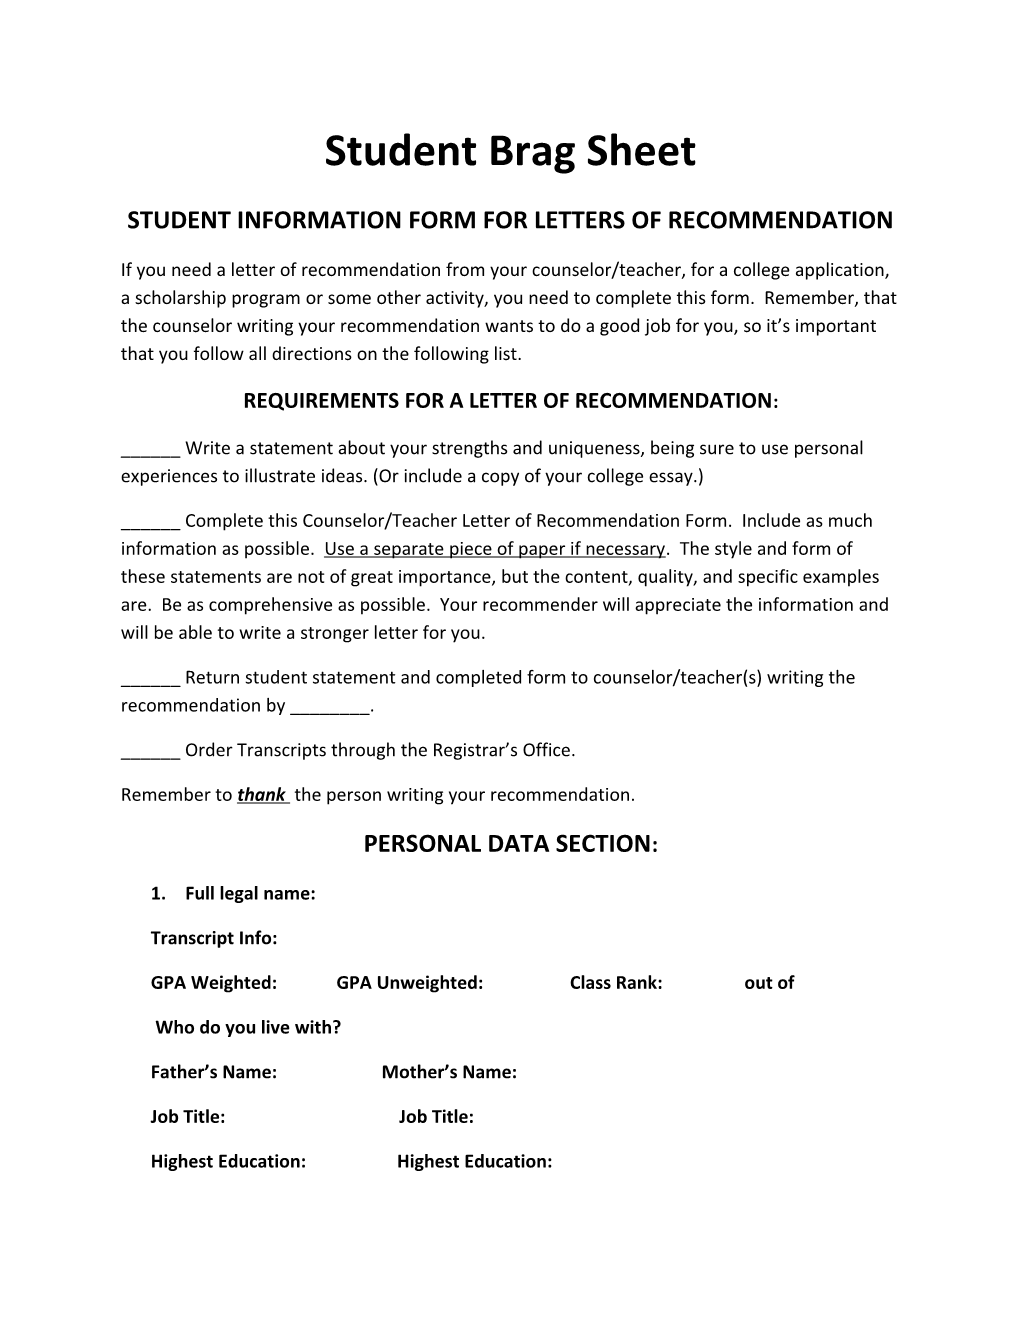 Student Information Form for Letters of Recommendation